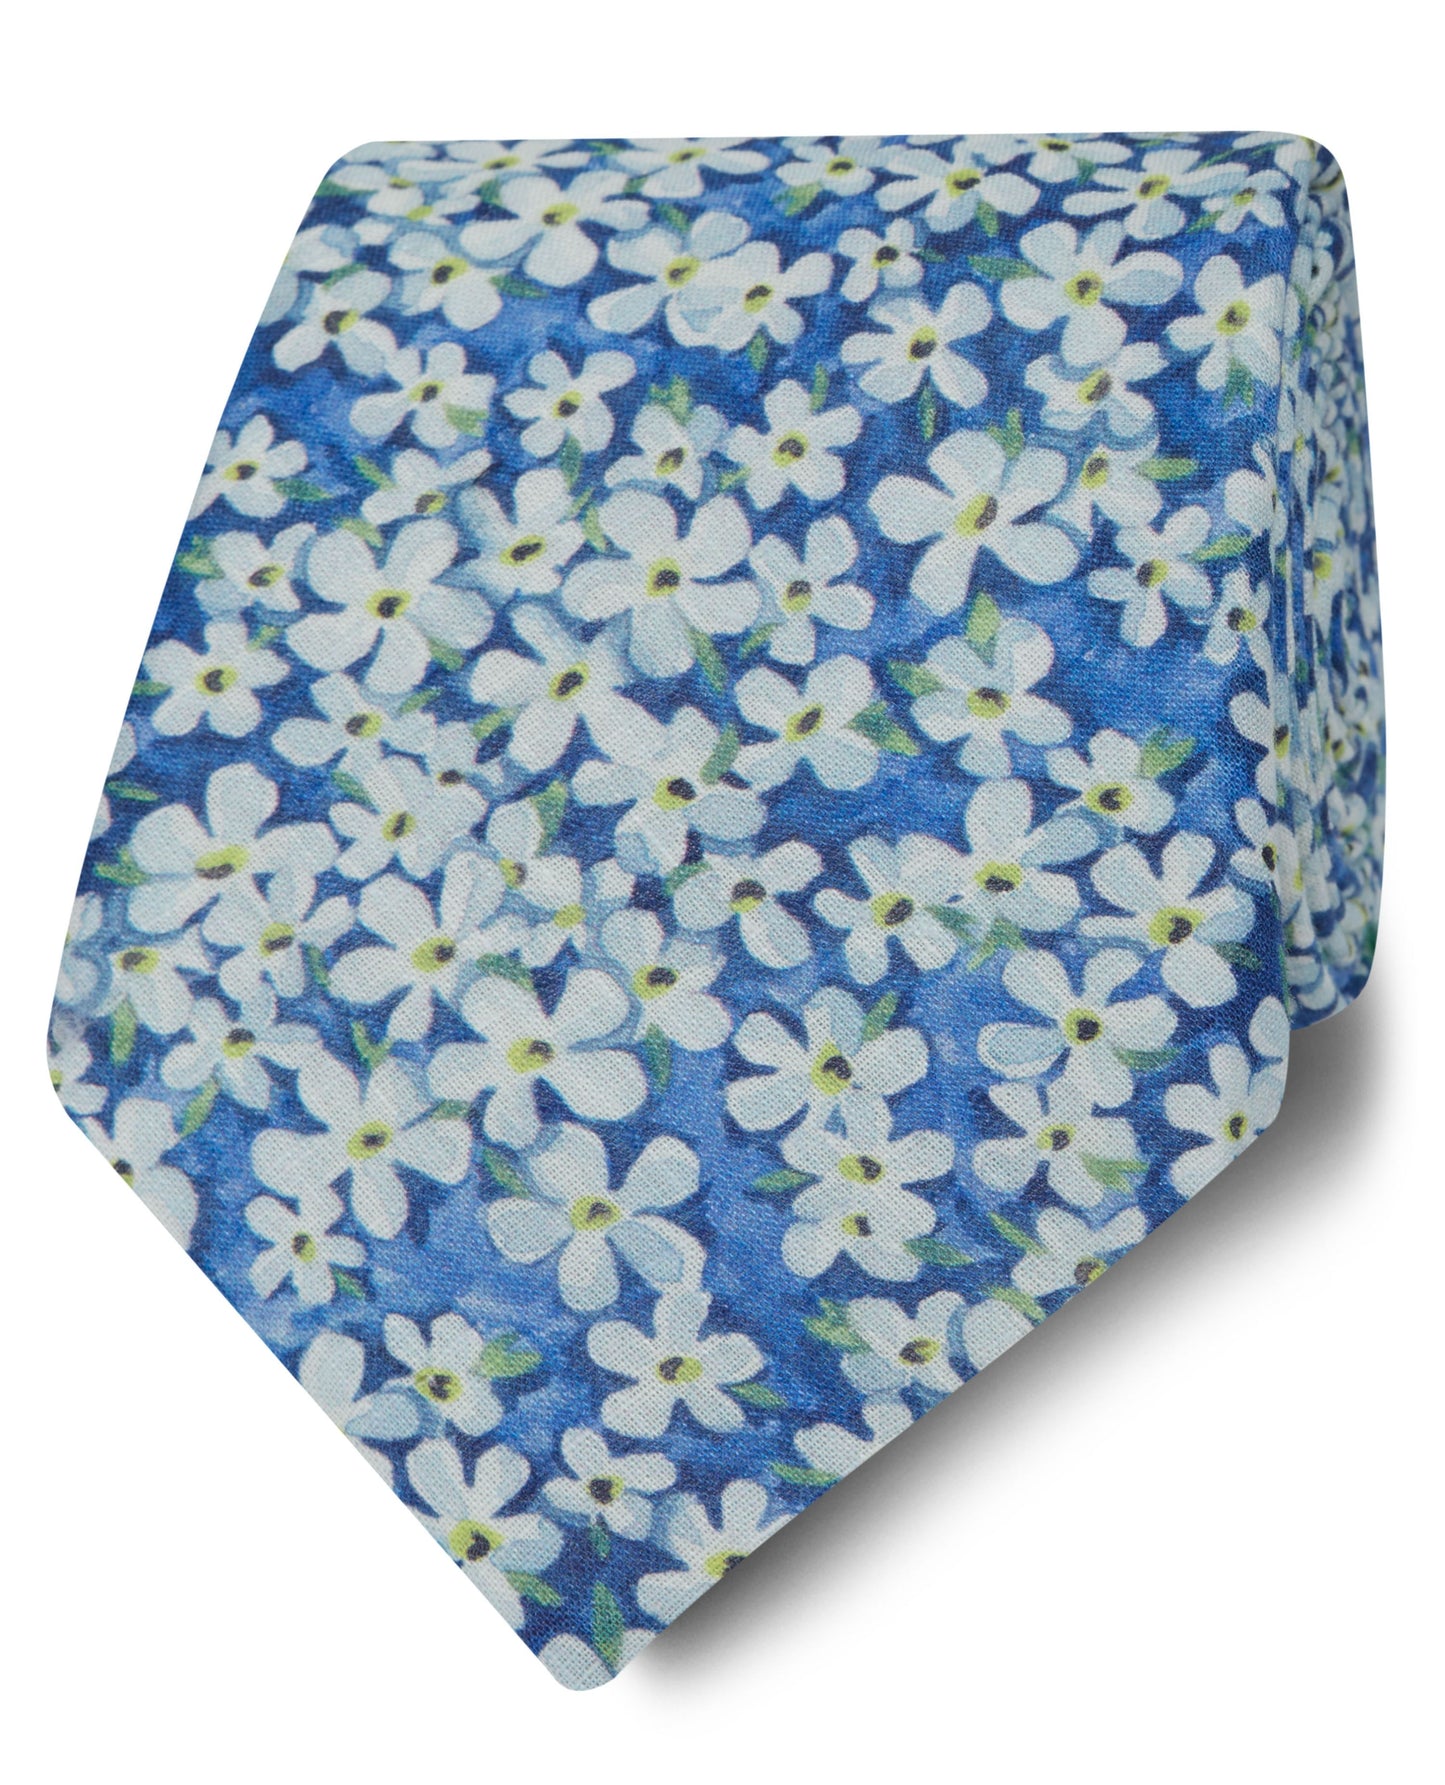 Image 1 of Made with Liberty Fabric Wide White and Green Petal Wish Tie